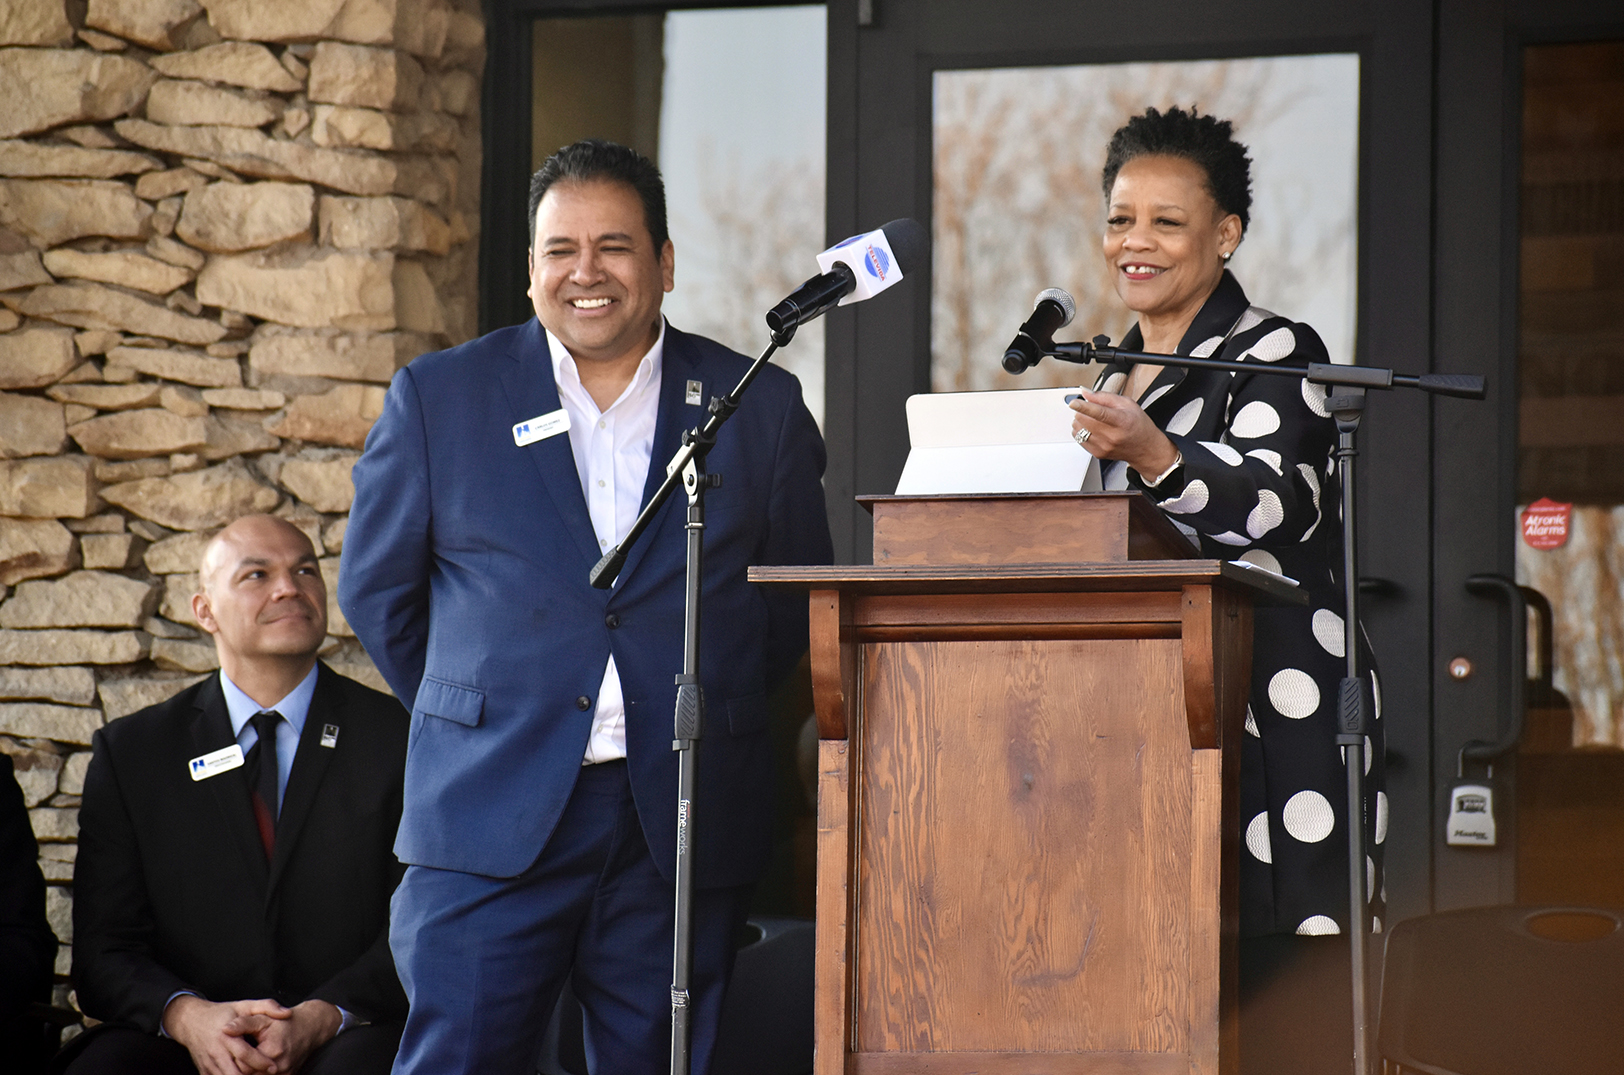 New home on Ward Parkway: $4M minority chamber project brings Black, Brown entrepreneurs under one banner